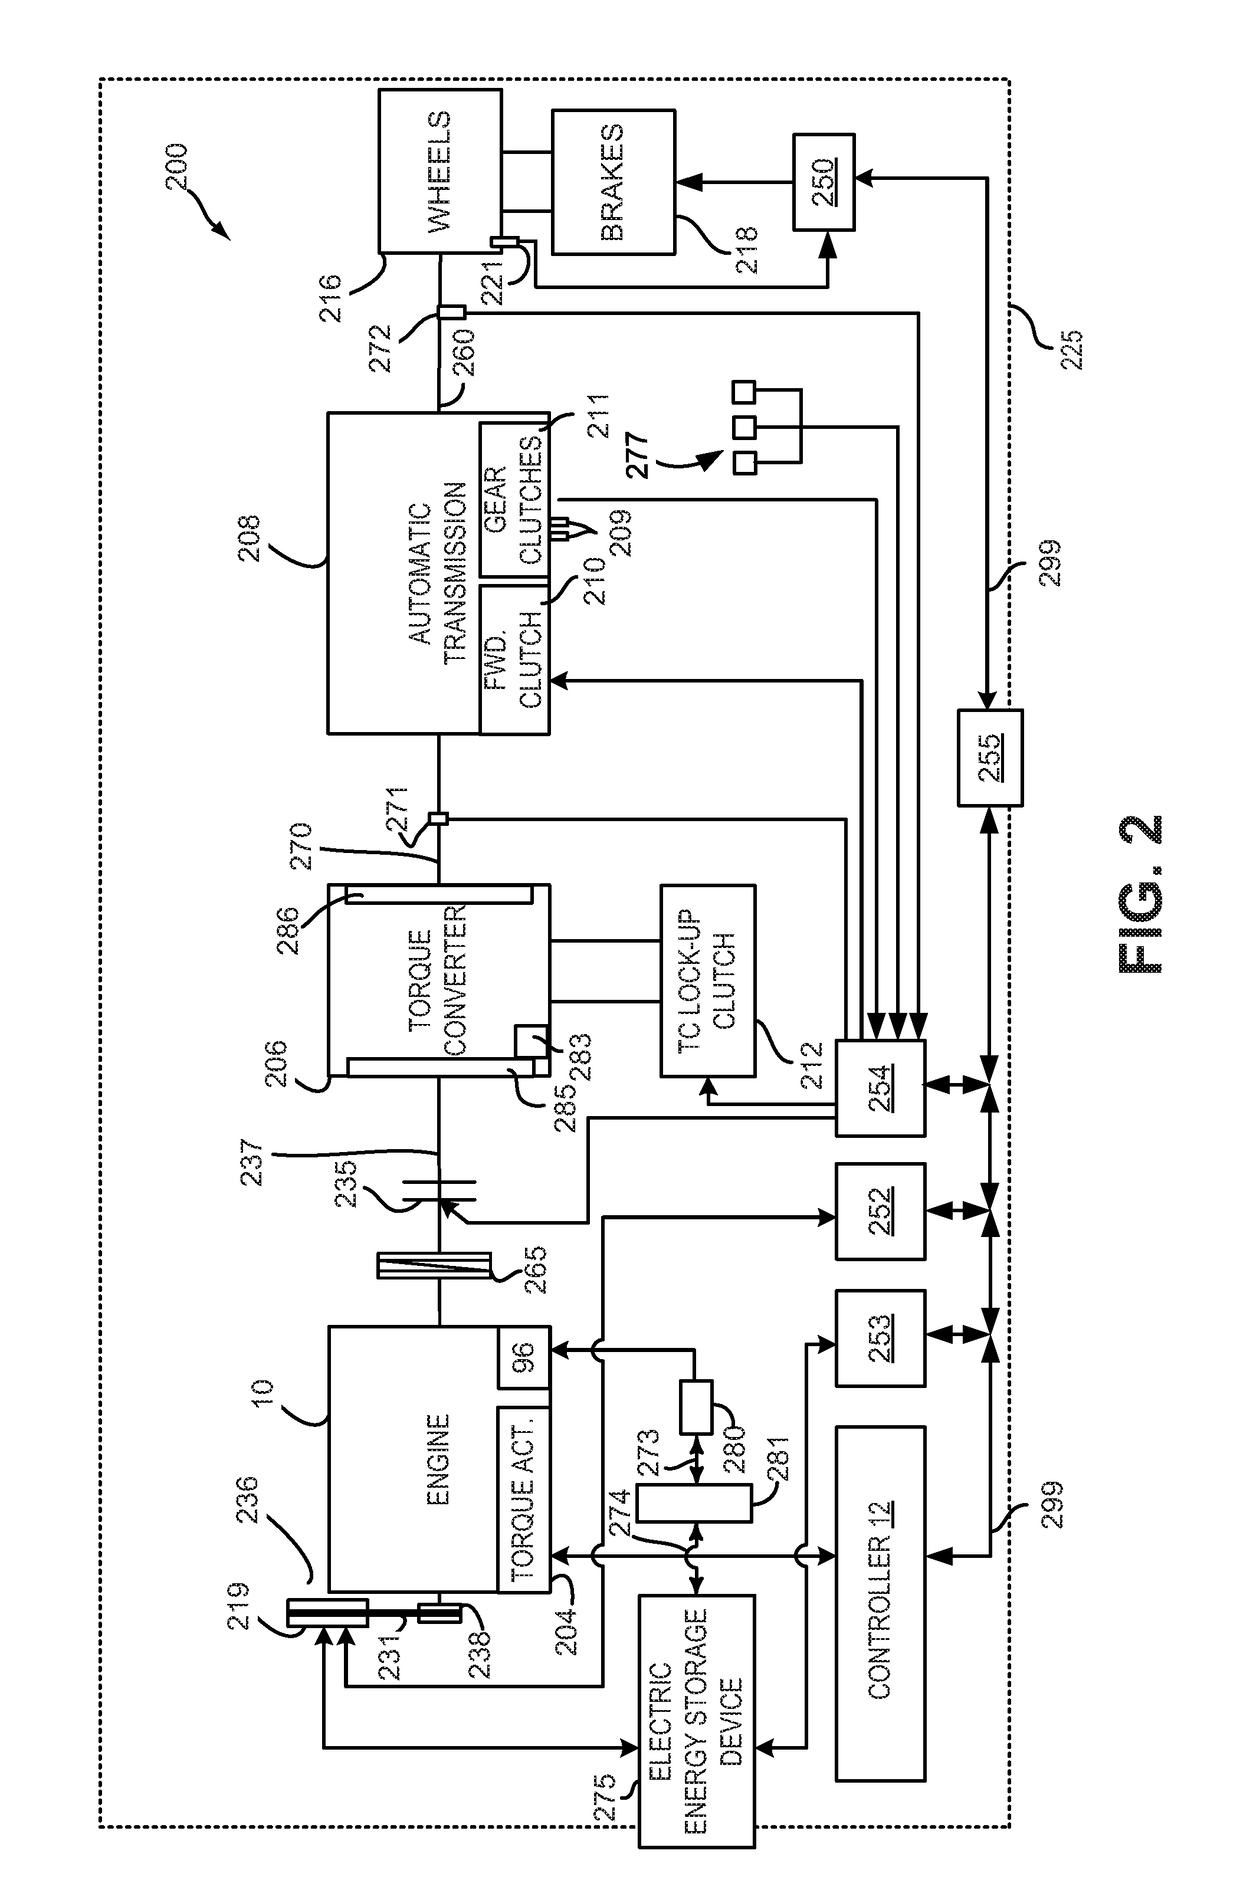 Methods and systems for a belt-driven integrated starter generator